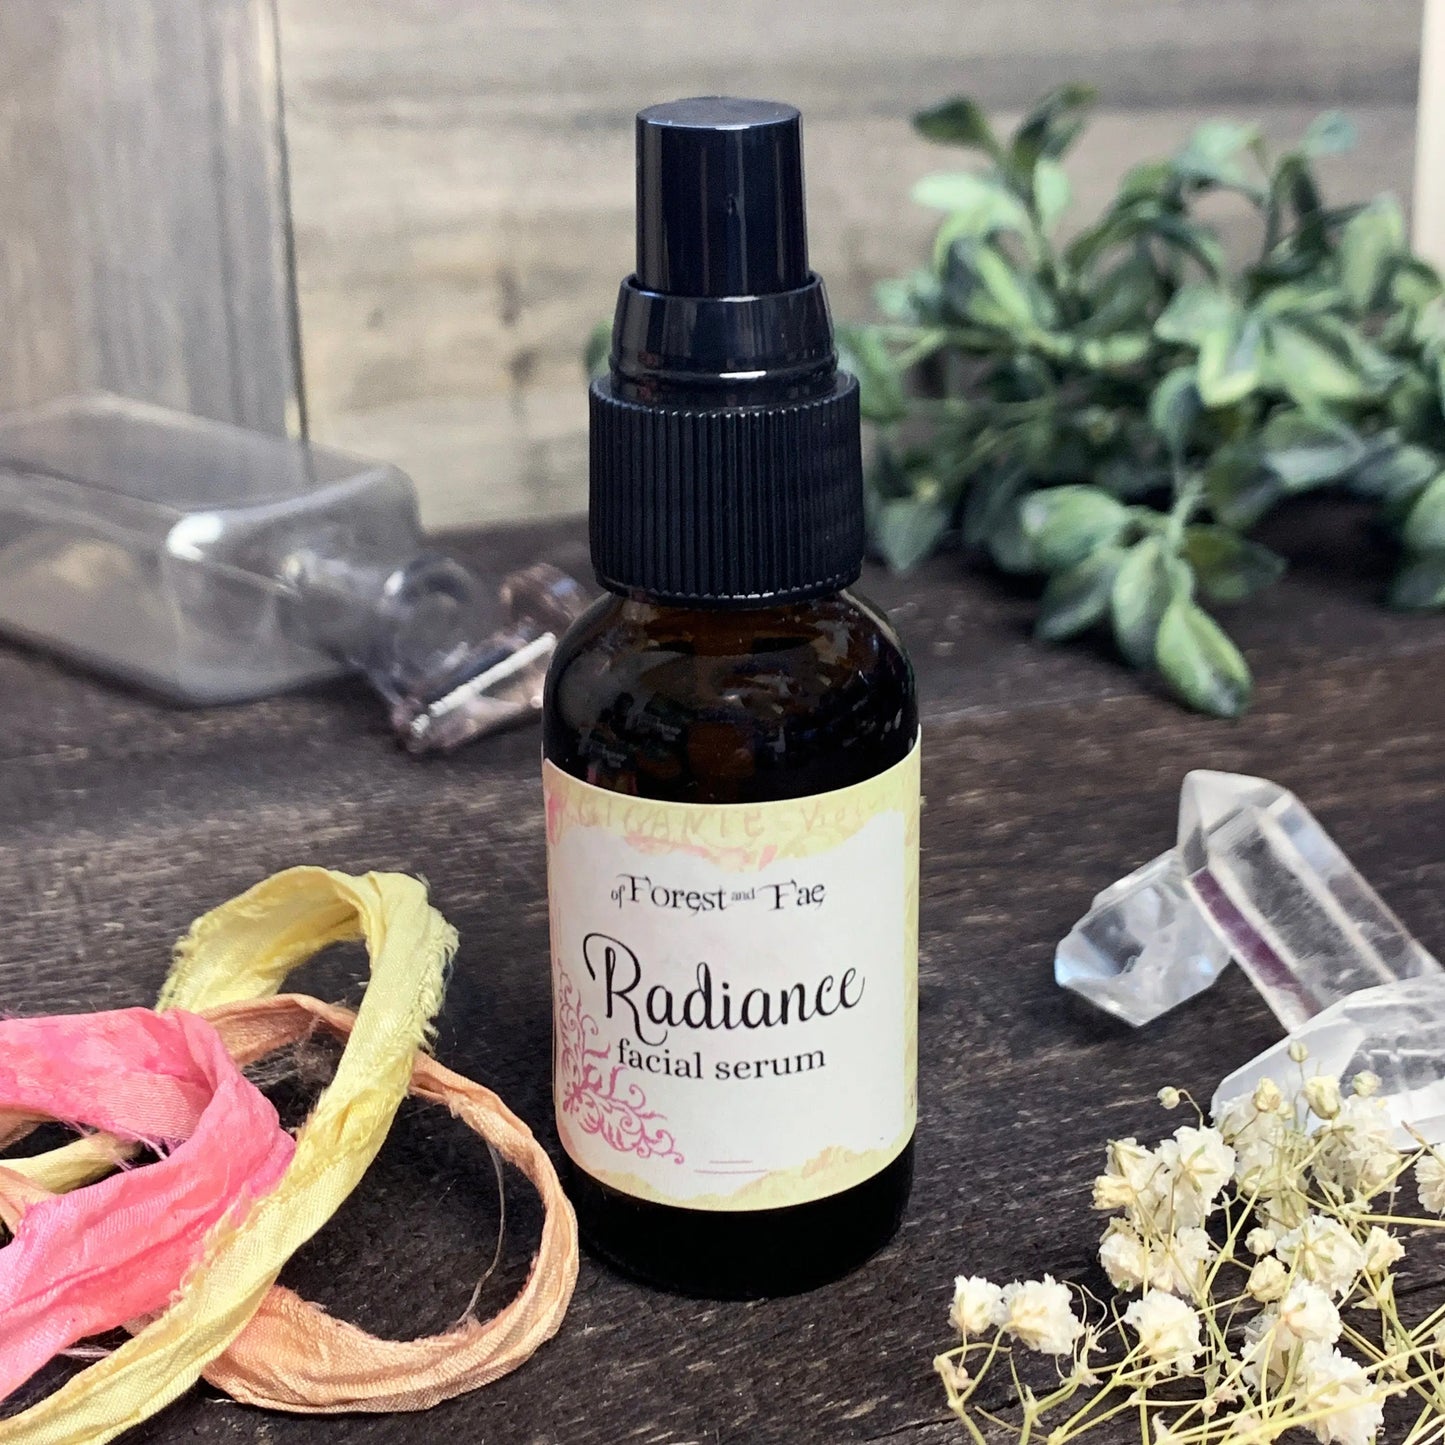 Radiance Facial Serum | Organic Herb Infused Oil | Witchy Skin Care | Green Witch | Cottagecore Skin Care | Boho Witchcraft | Forest Witch - Spellbound